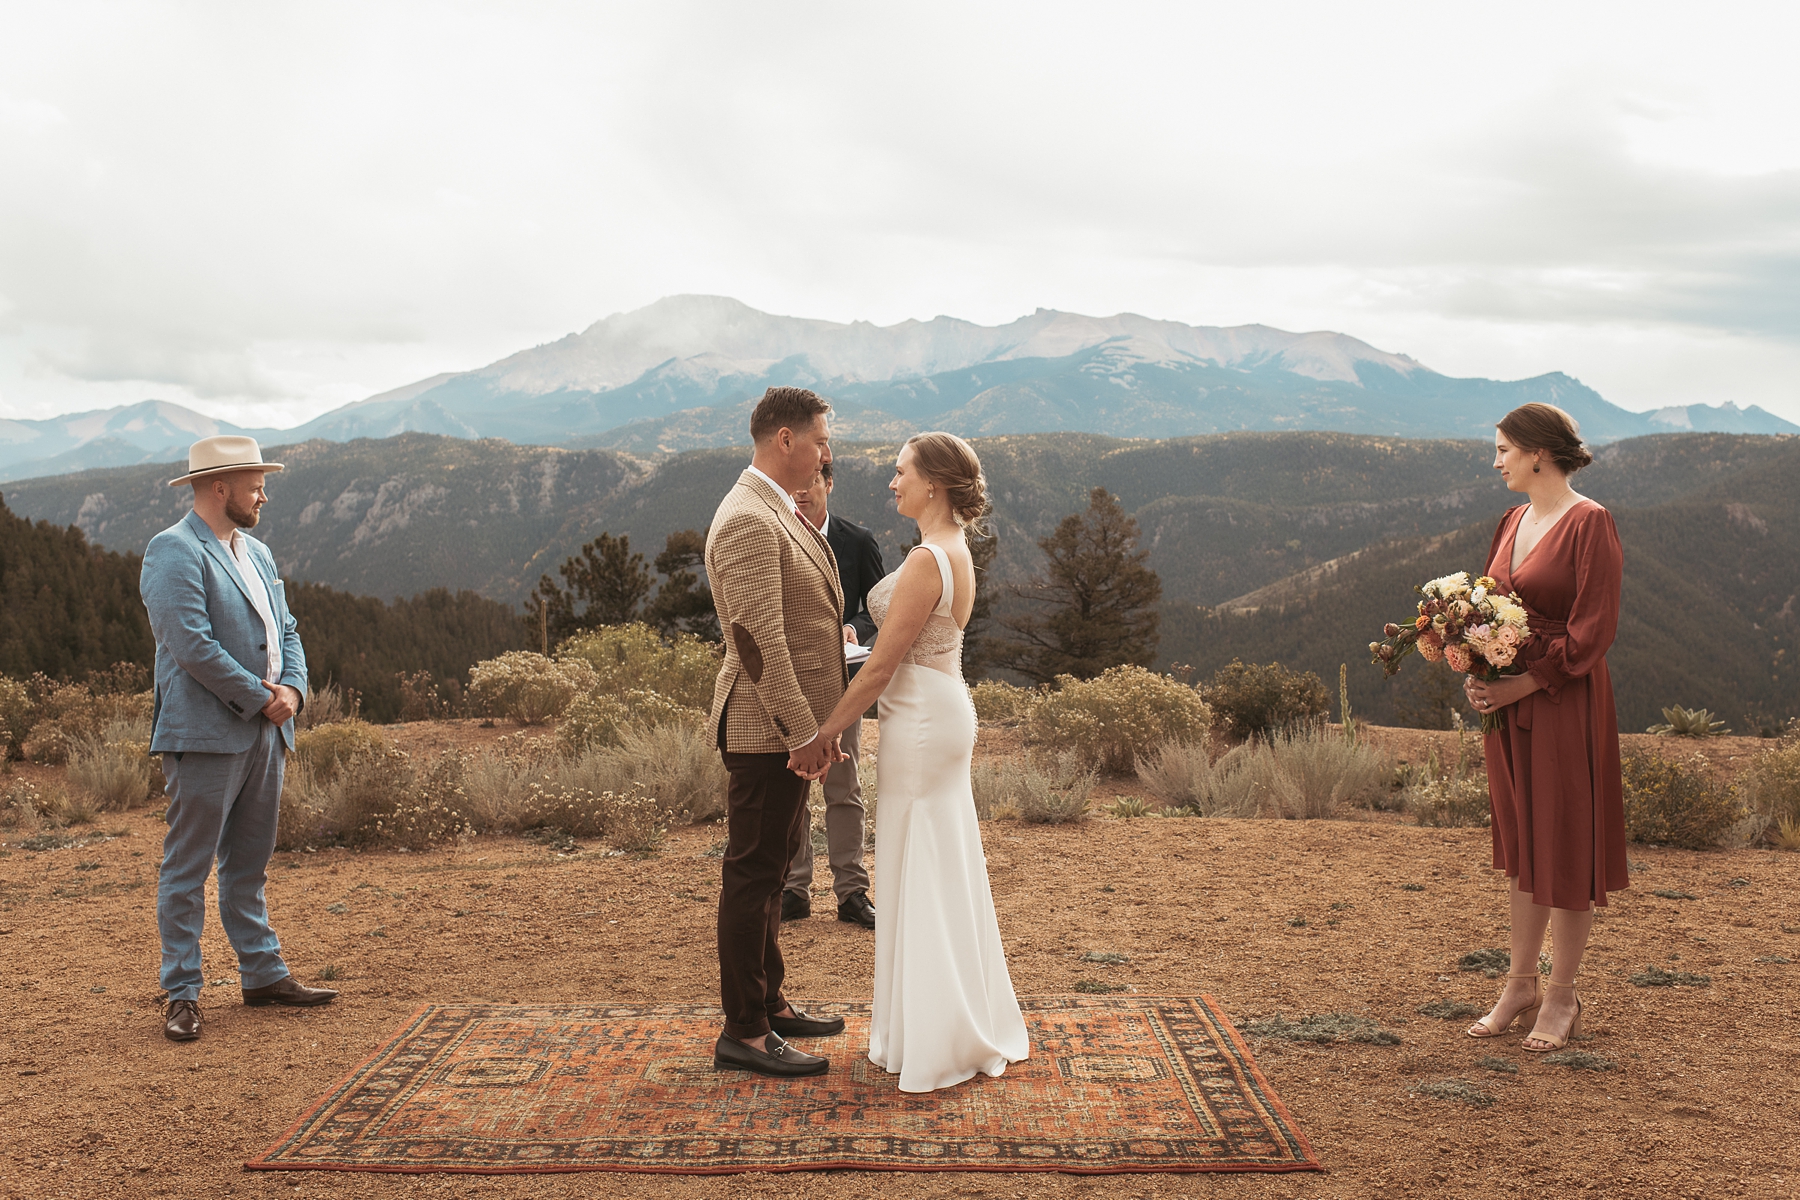 Bride and groom looking at each other and holding hands during ceremony at Airbnb wedding venue in Colorado